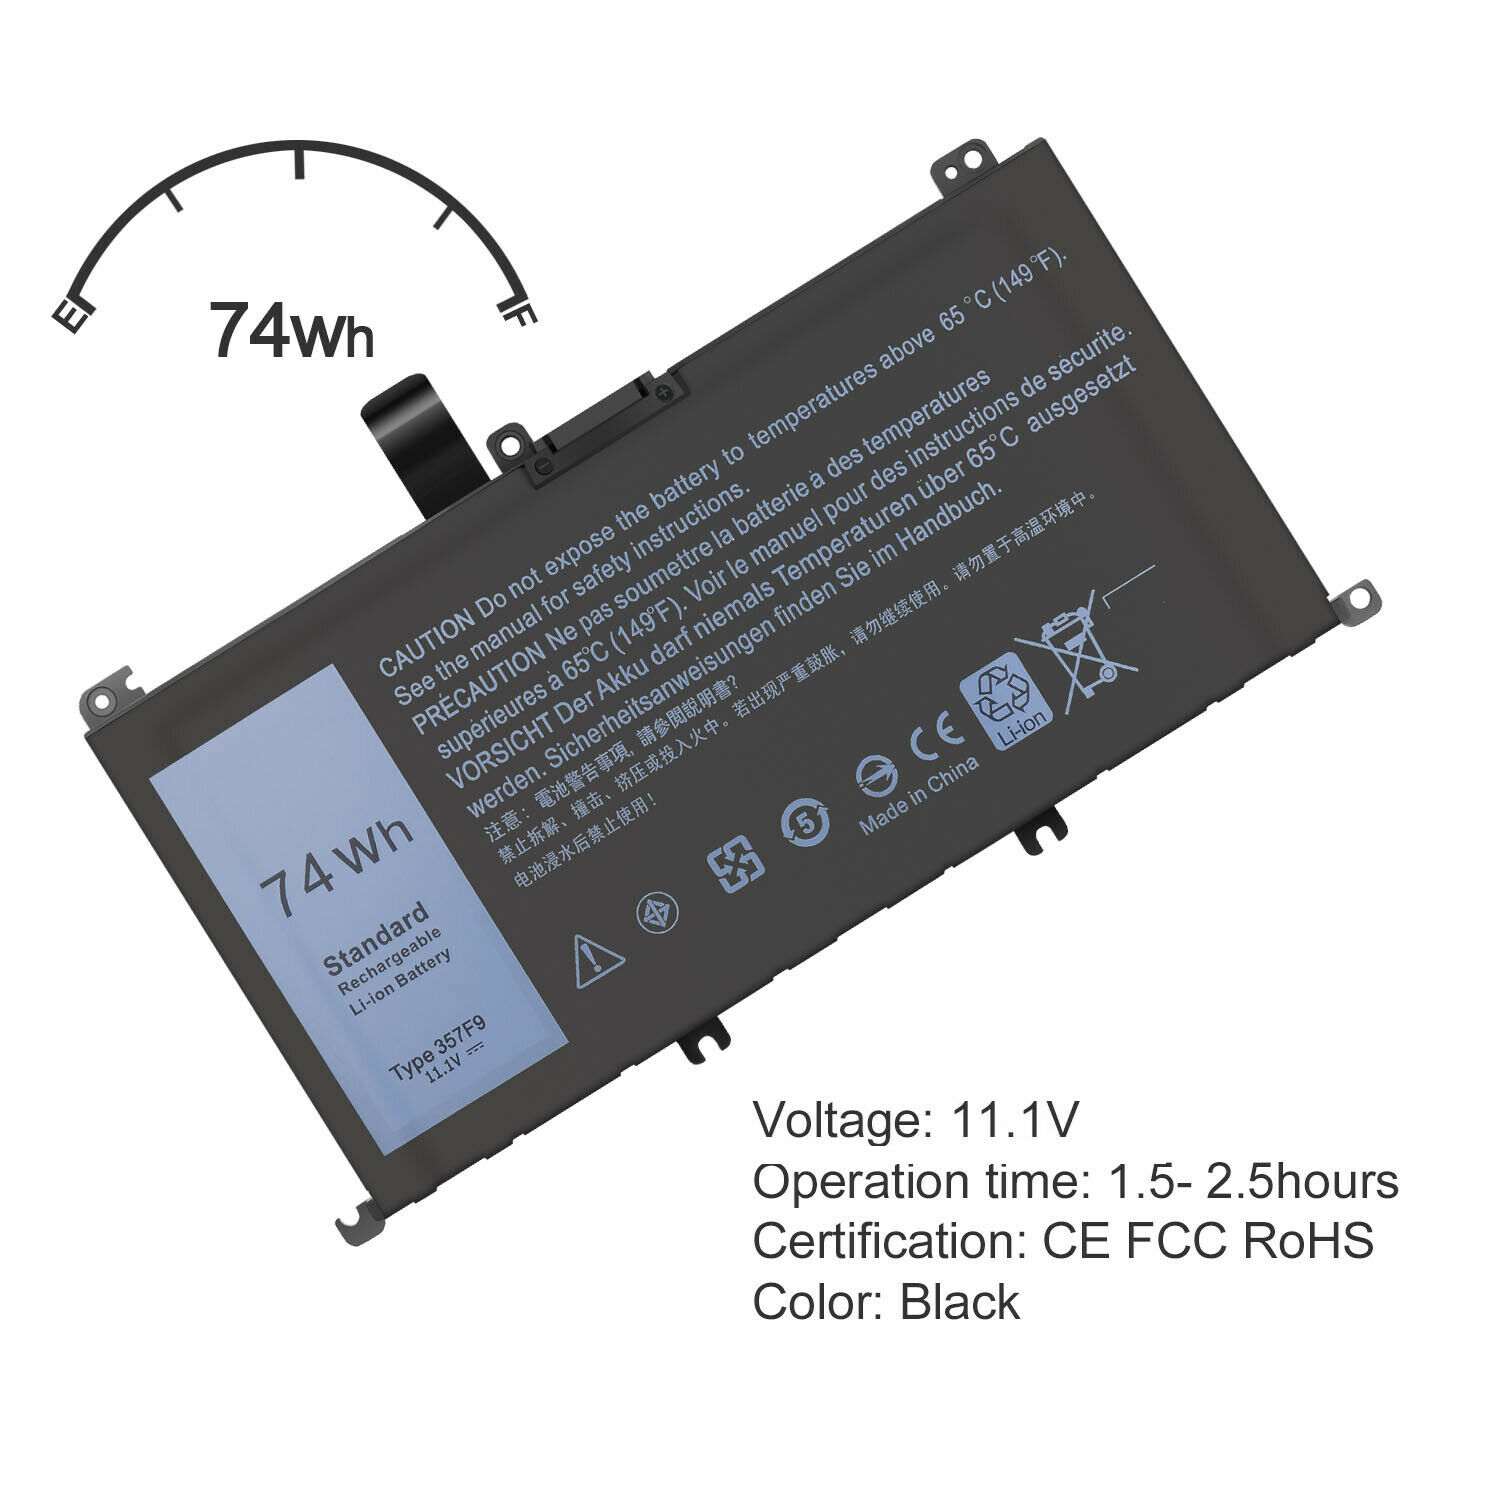 74Wh 357F9 Notebook Battery 74Wh for DELL Inspiron 5576 5577 7557 7559 7566 7567 - image 2 of 6